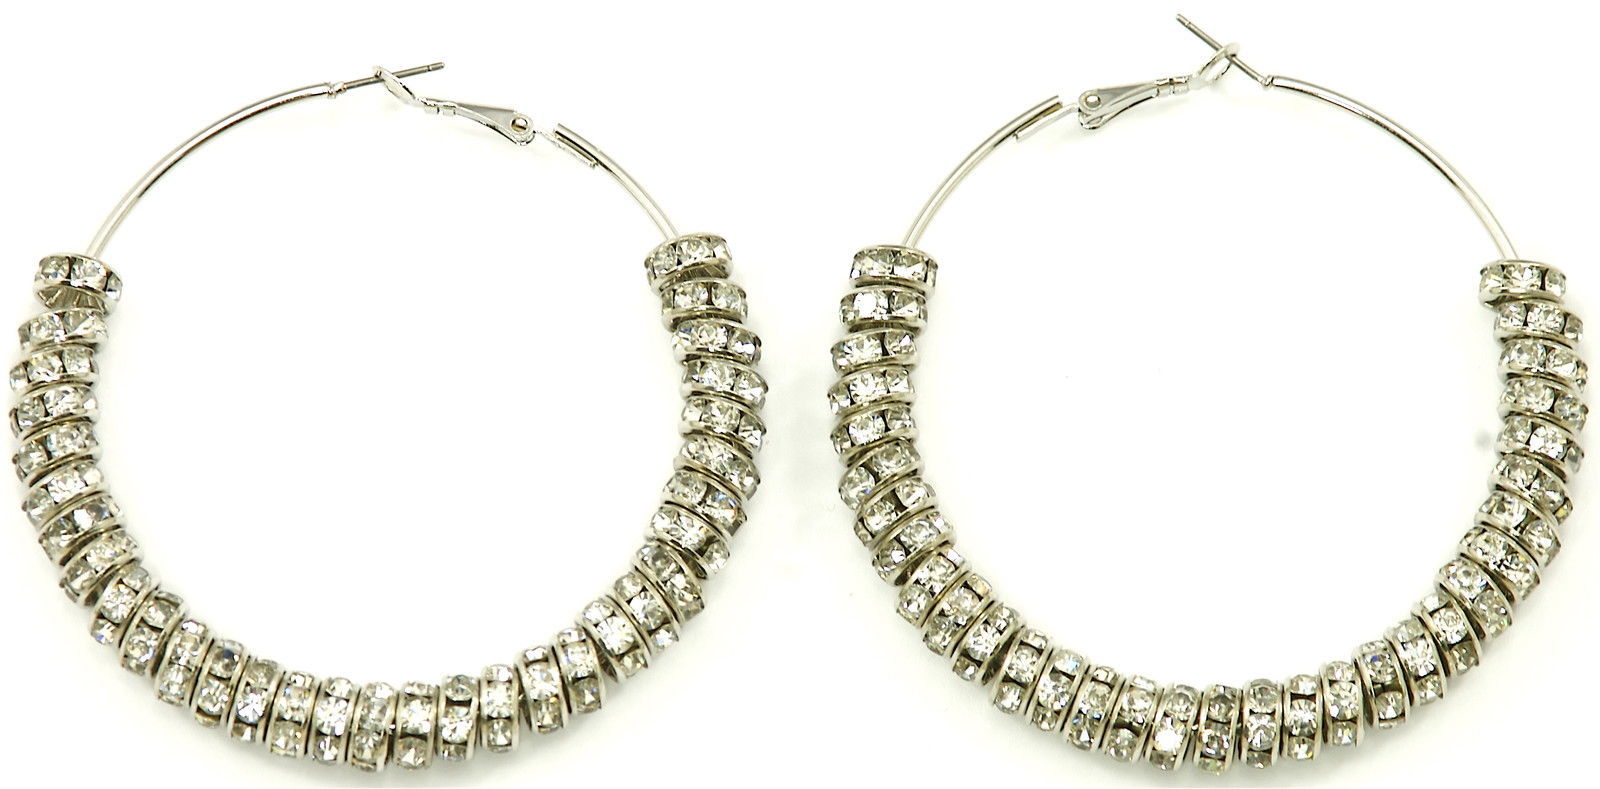 Primary image for New Hoop Earrings With 32 Iced Out Rings Paparazzi Gaga Basketball Wives Style